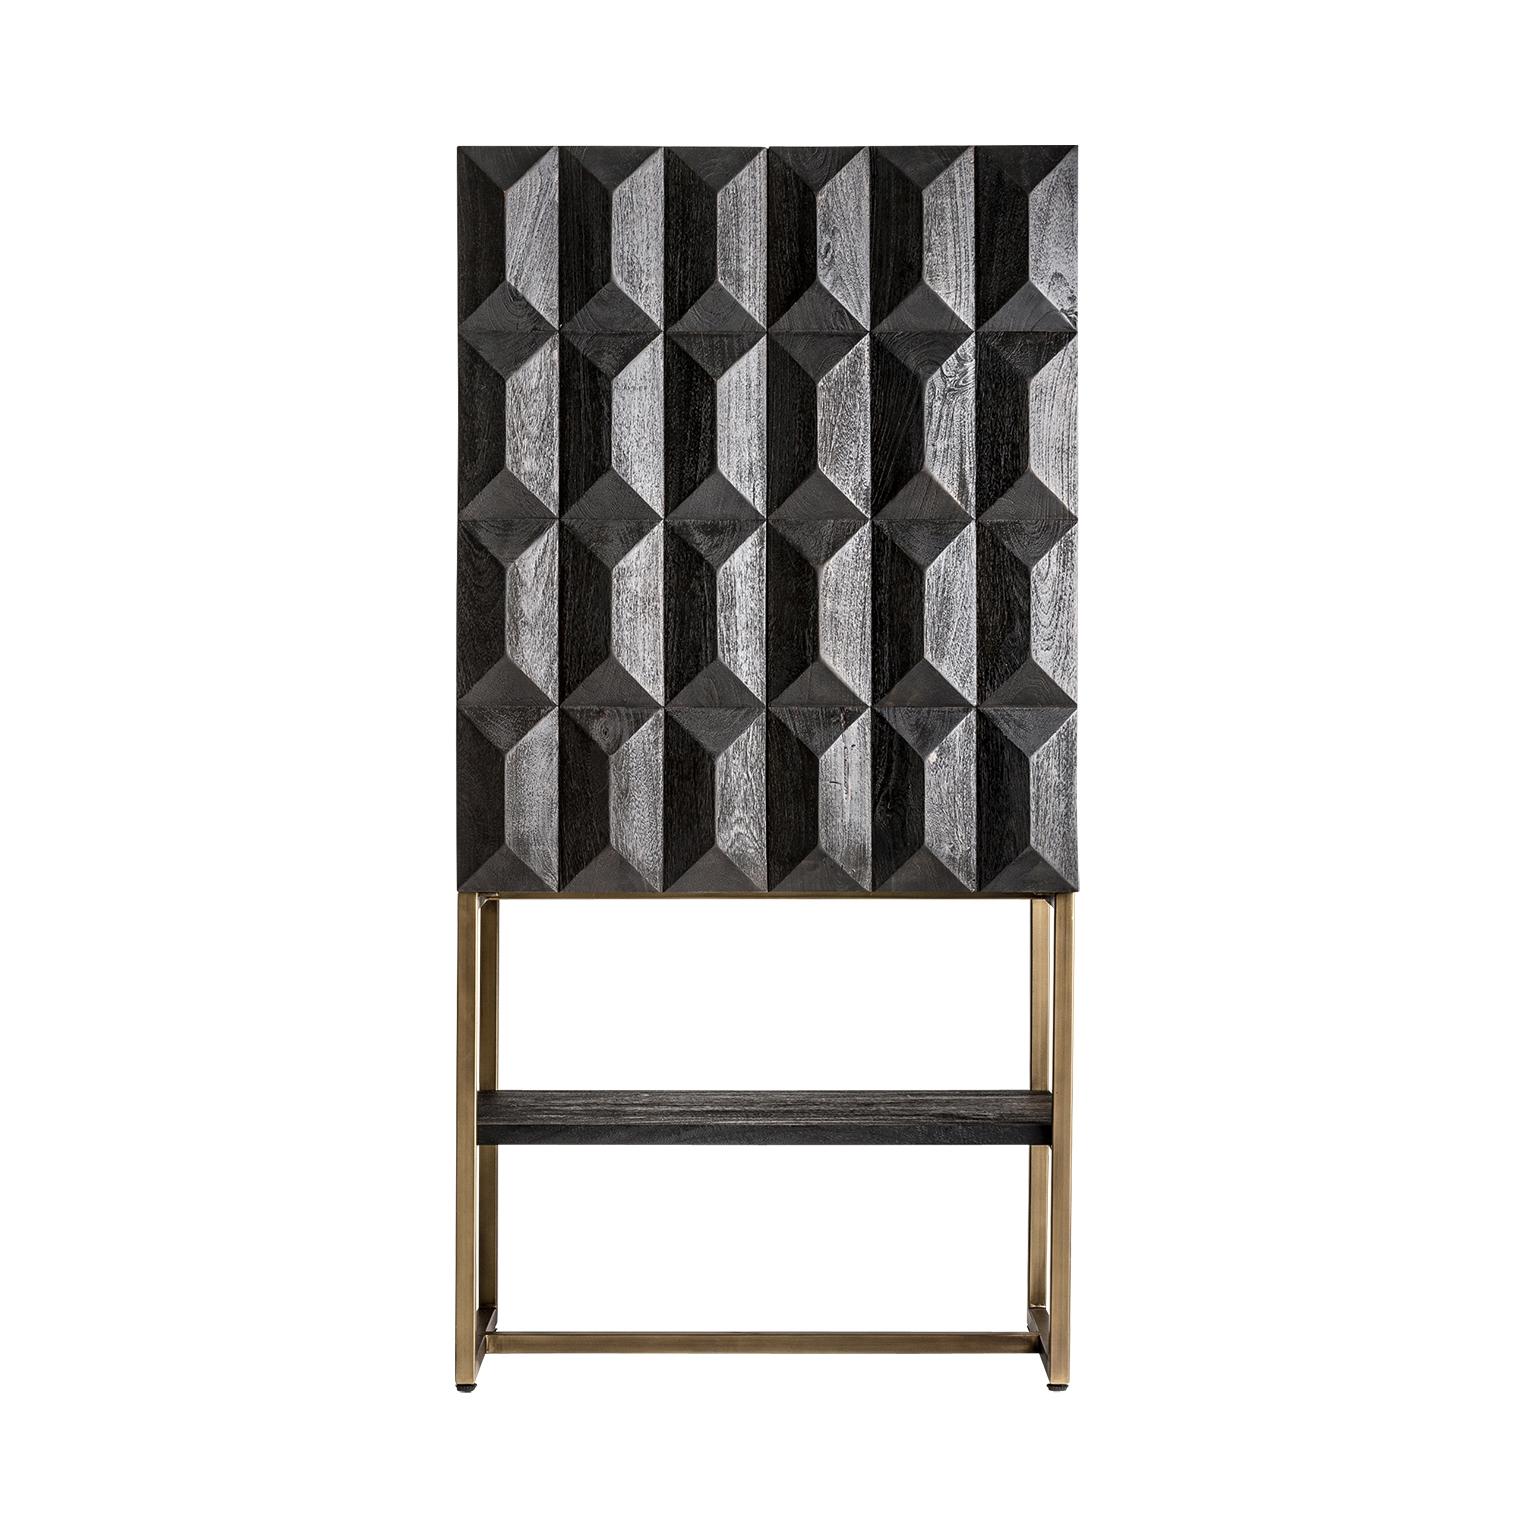 Contemporary Black Wooden Dry Bar Cabinet Brutalist Style with Graphic Patterns